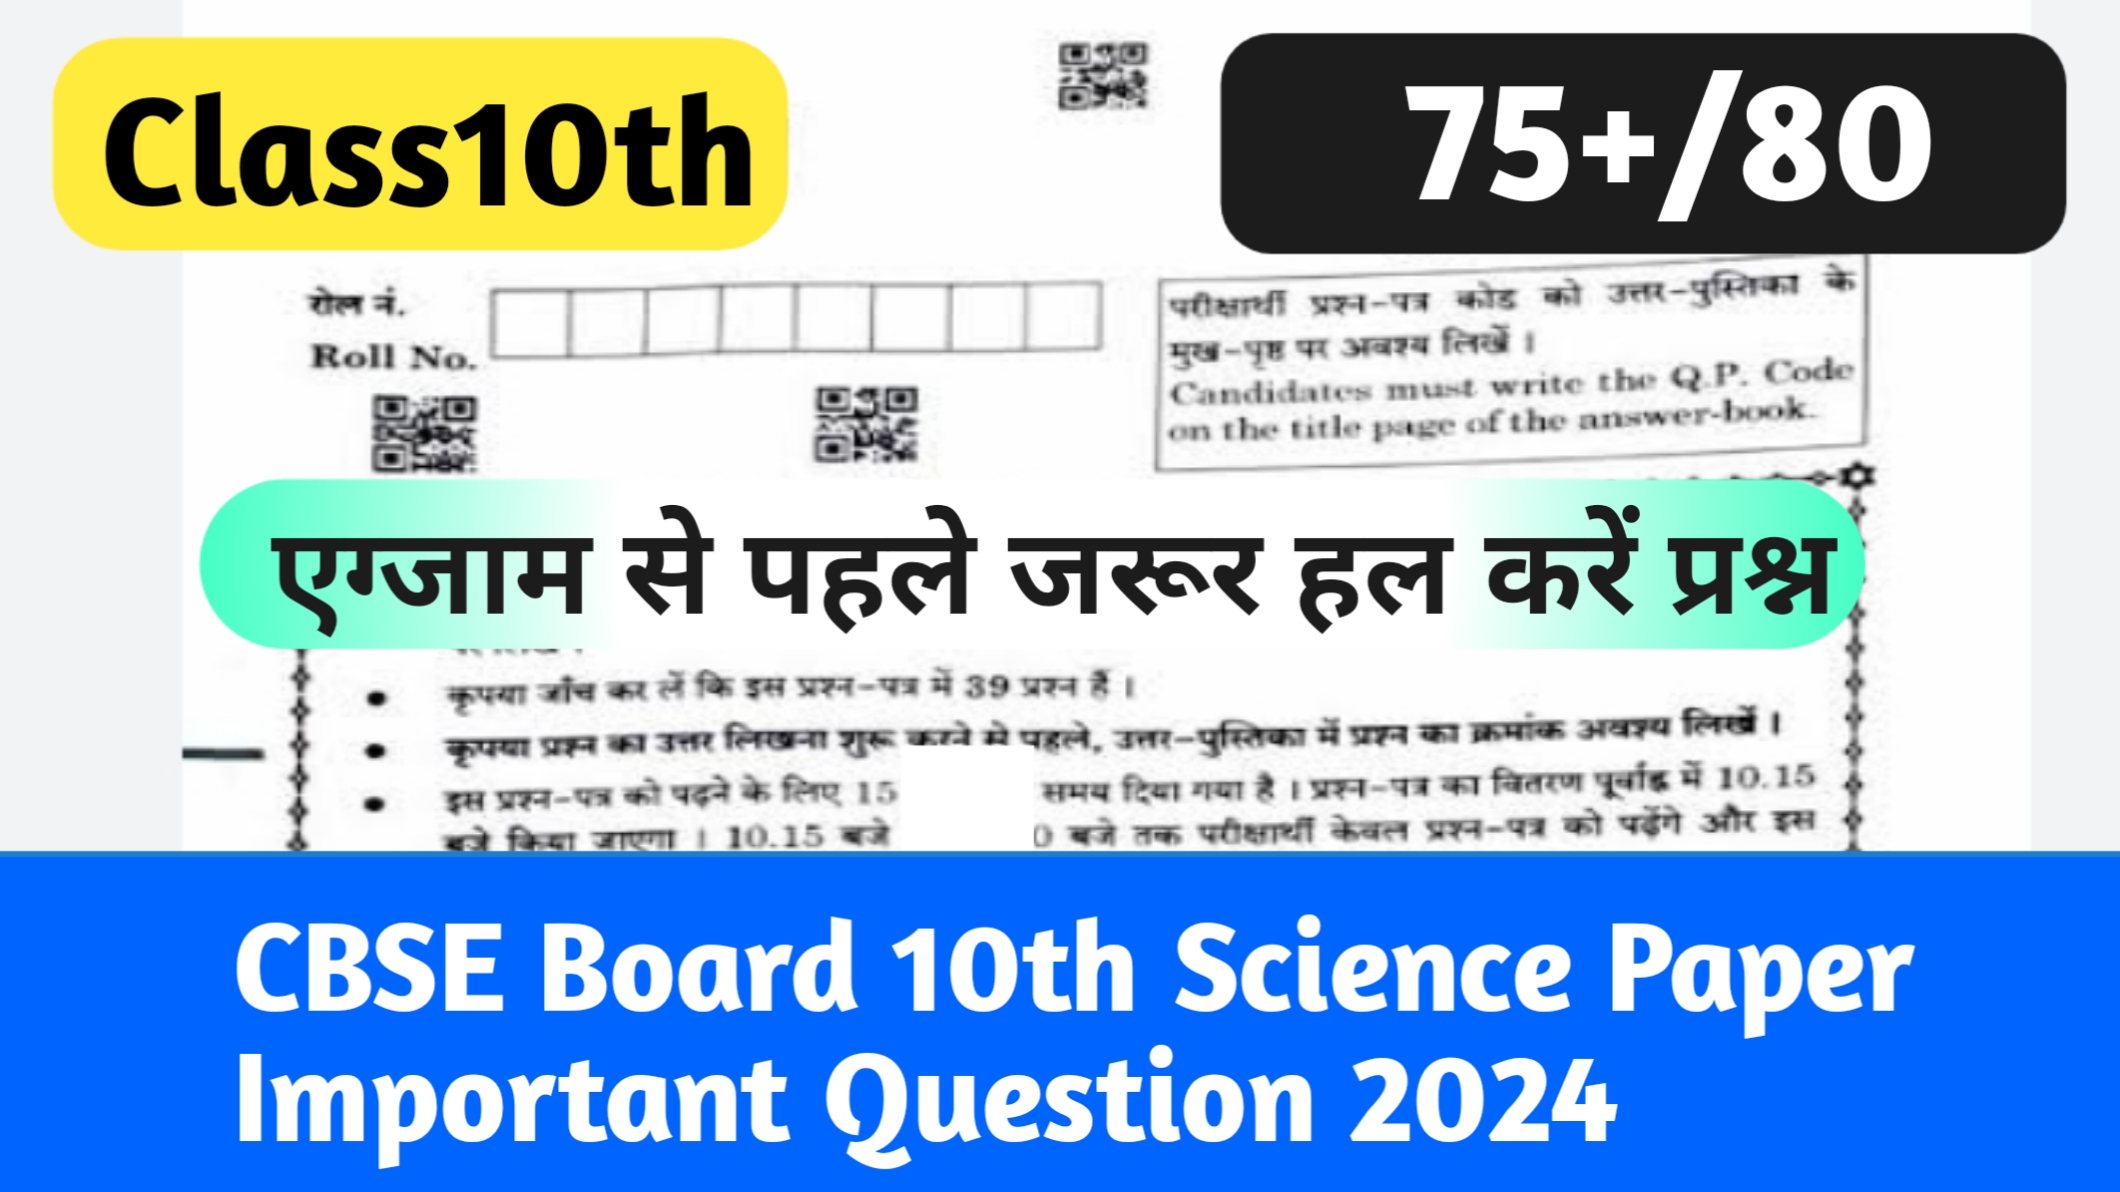 CBSE Board 10th Science Paper Important Question 2024: